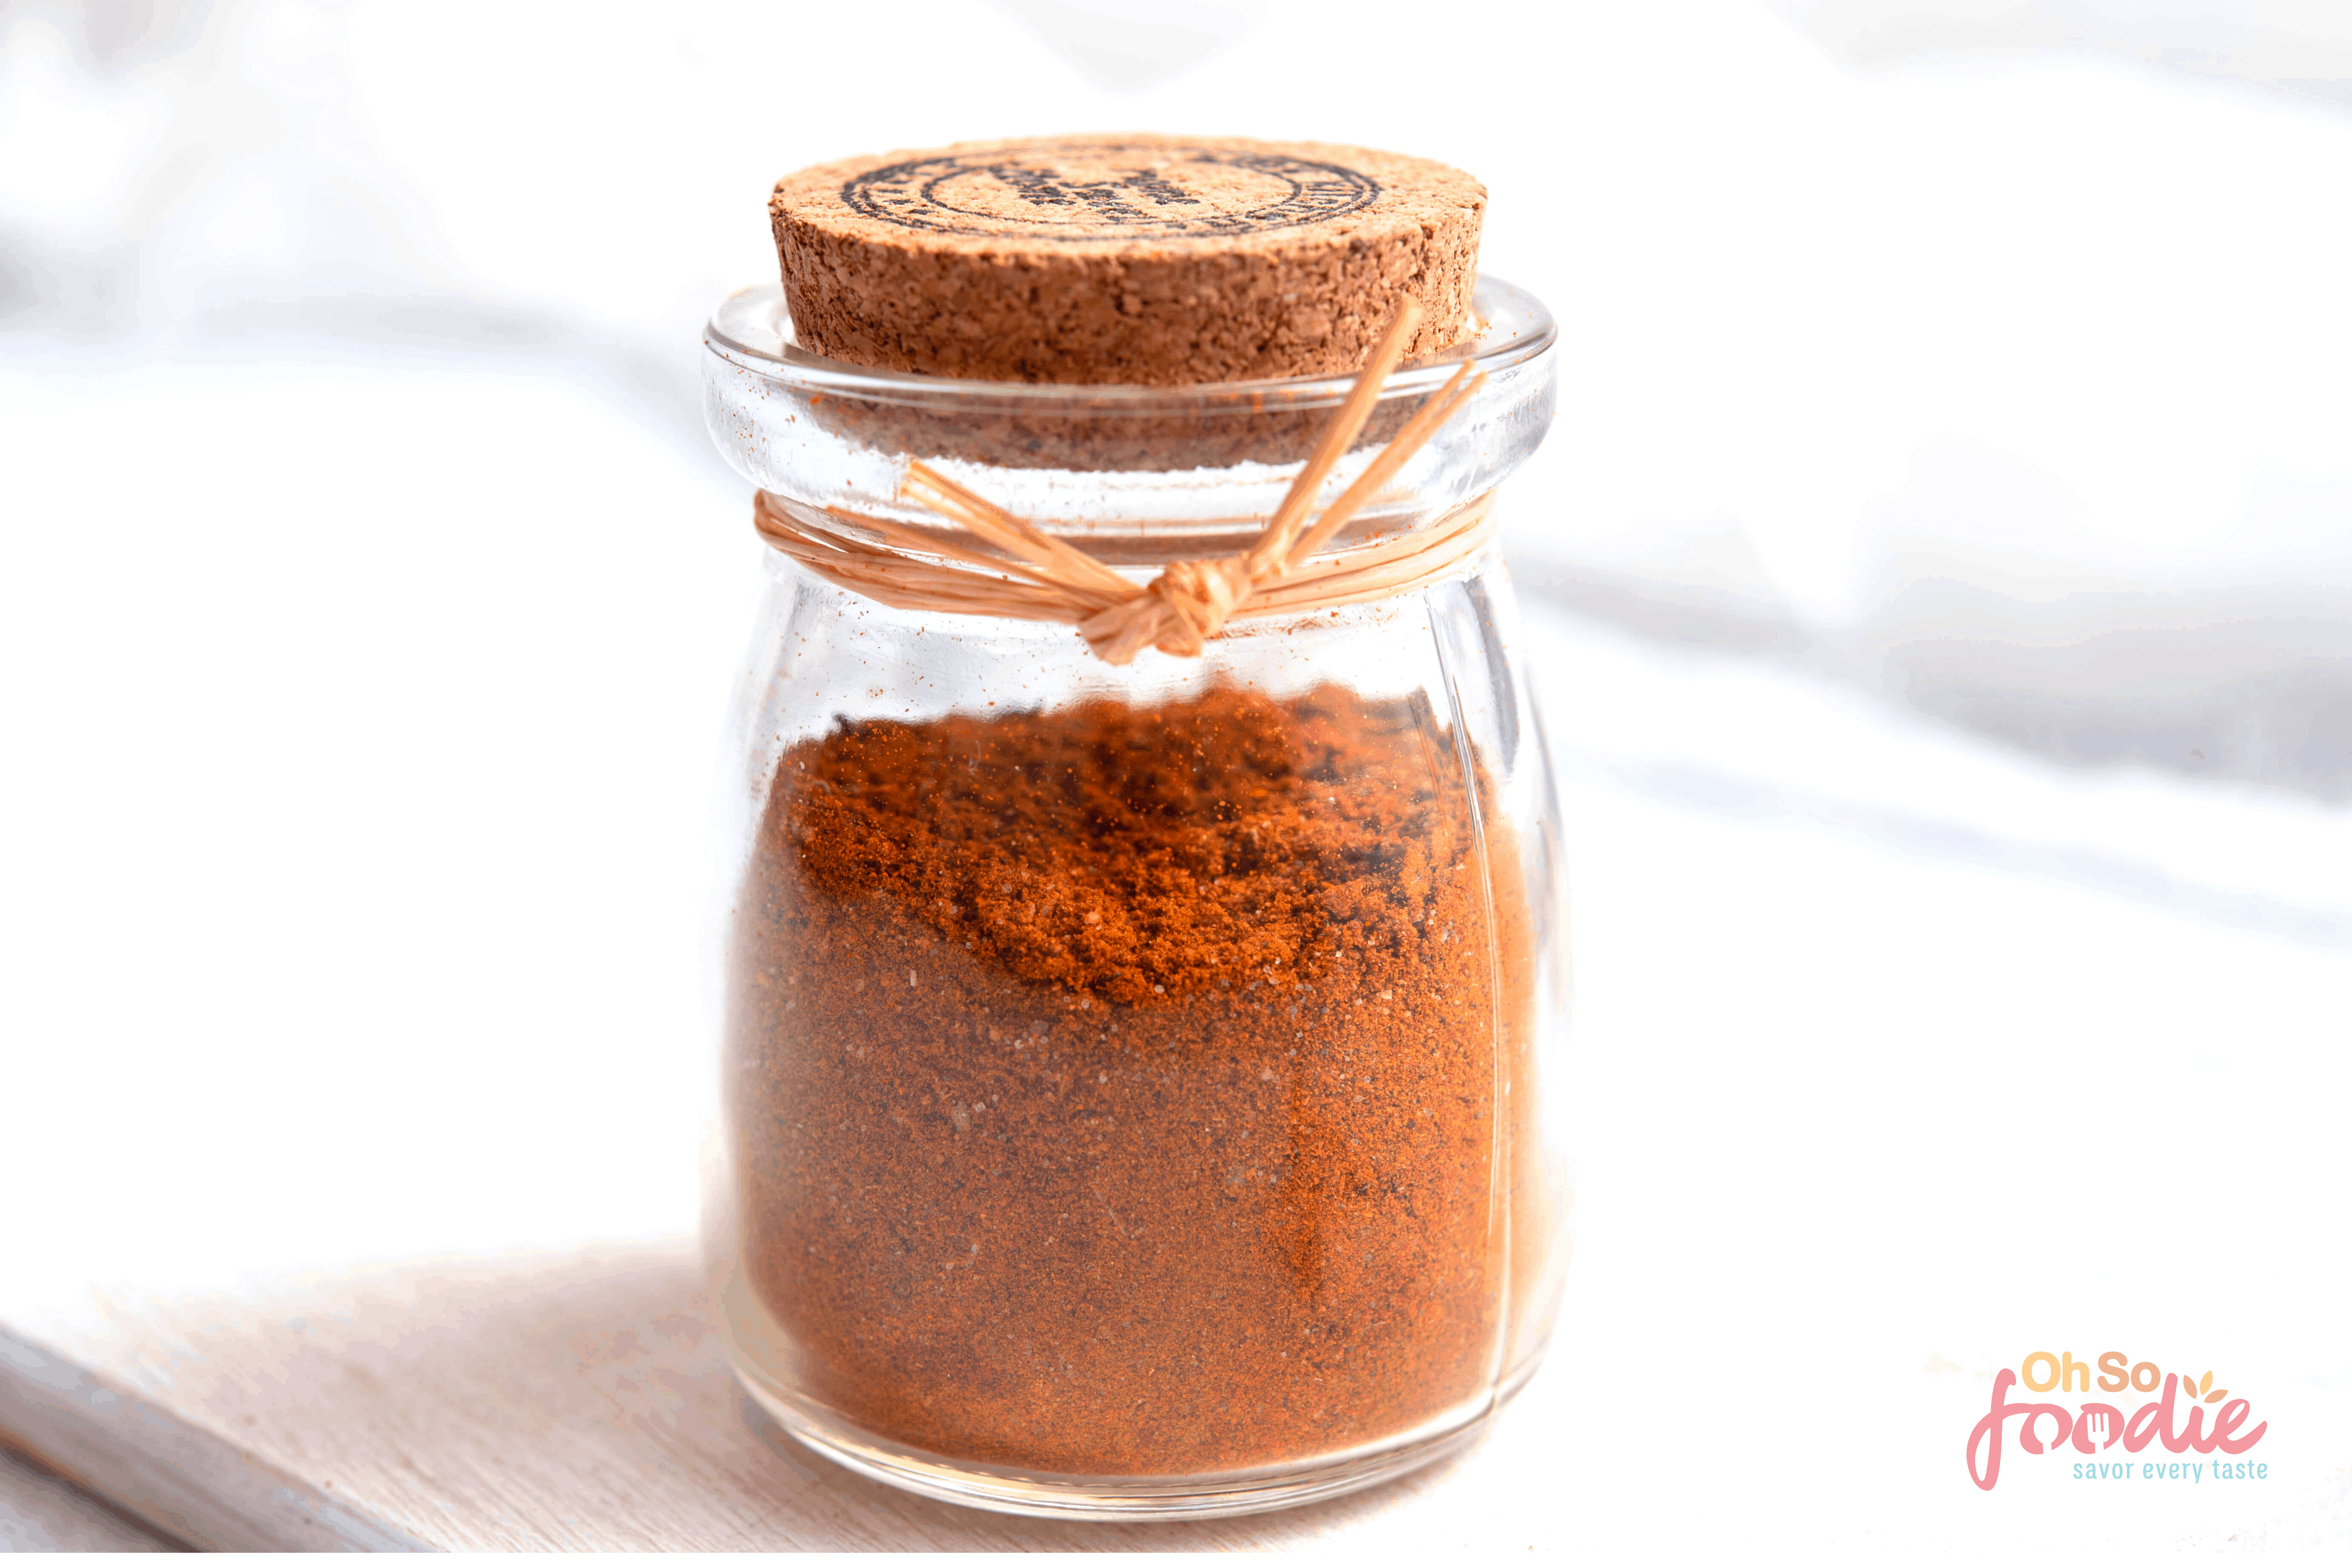 https://ohsofoodie.com/wp-content/uploads/2021/05/southwest-spice-blend-1.png